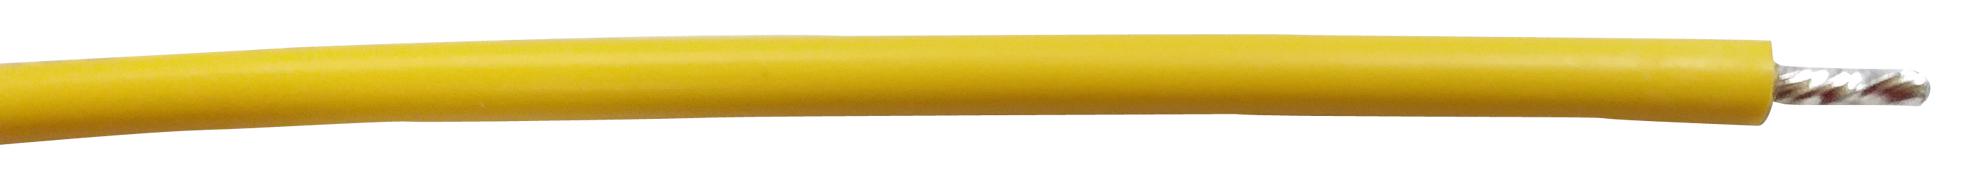 PP002362 HOOK-UP WIRE, 22AWG, YELLOW, 305M, 600V PRO POWER